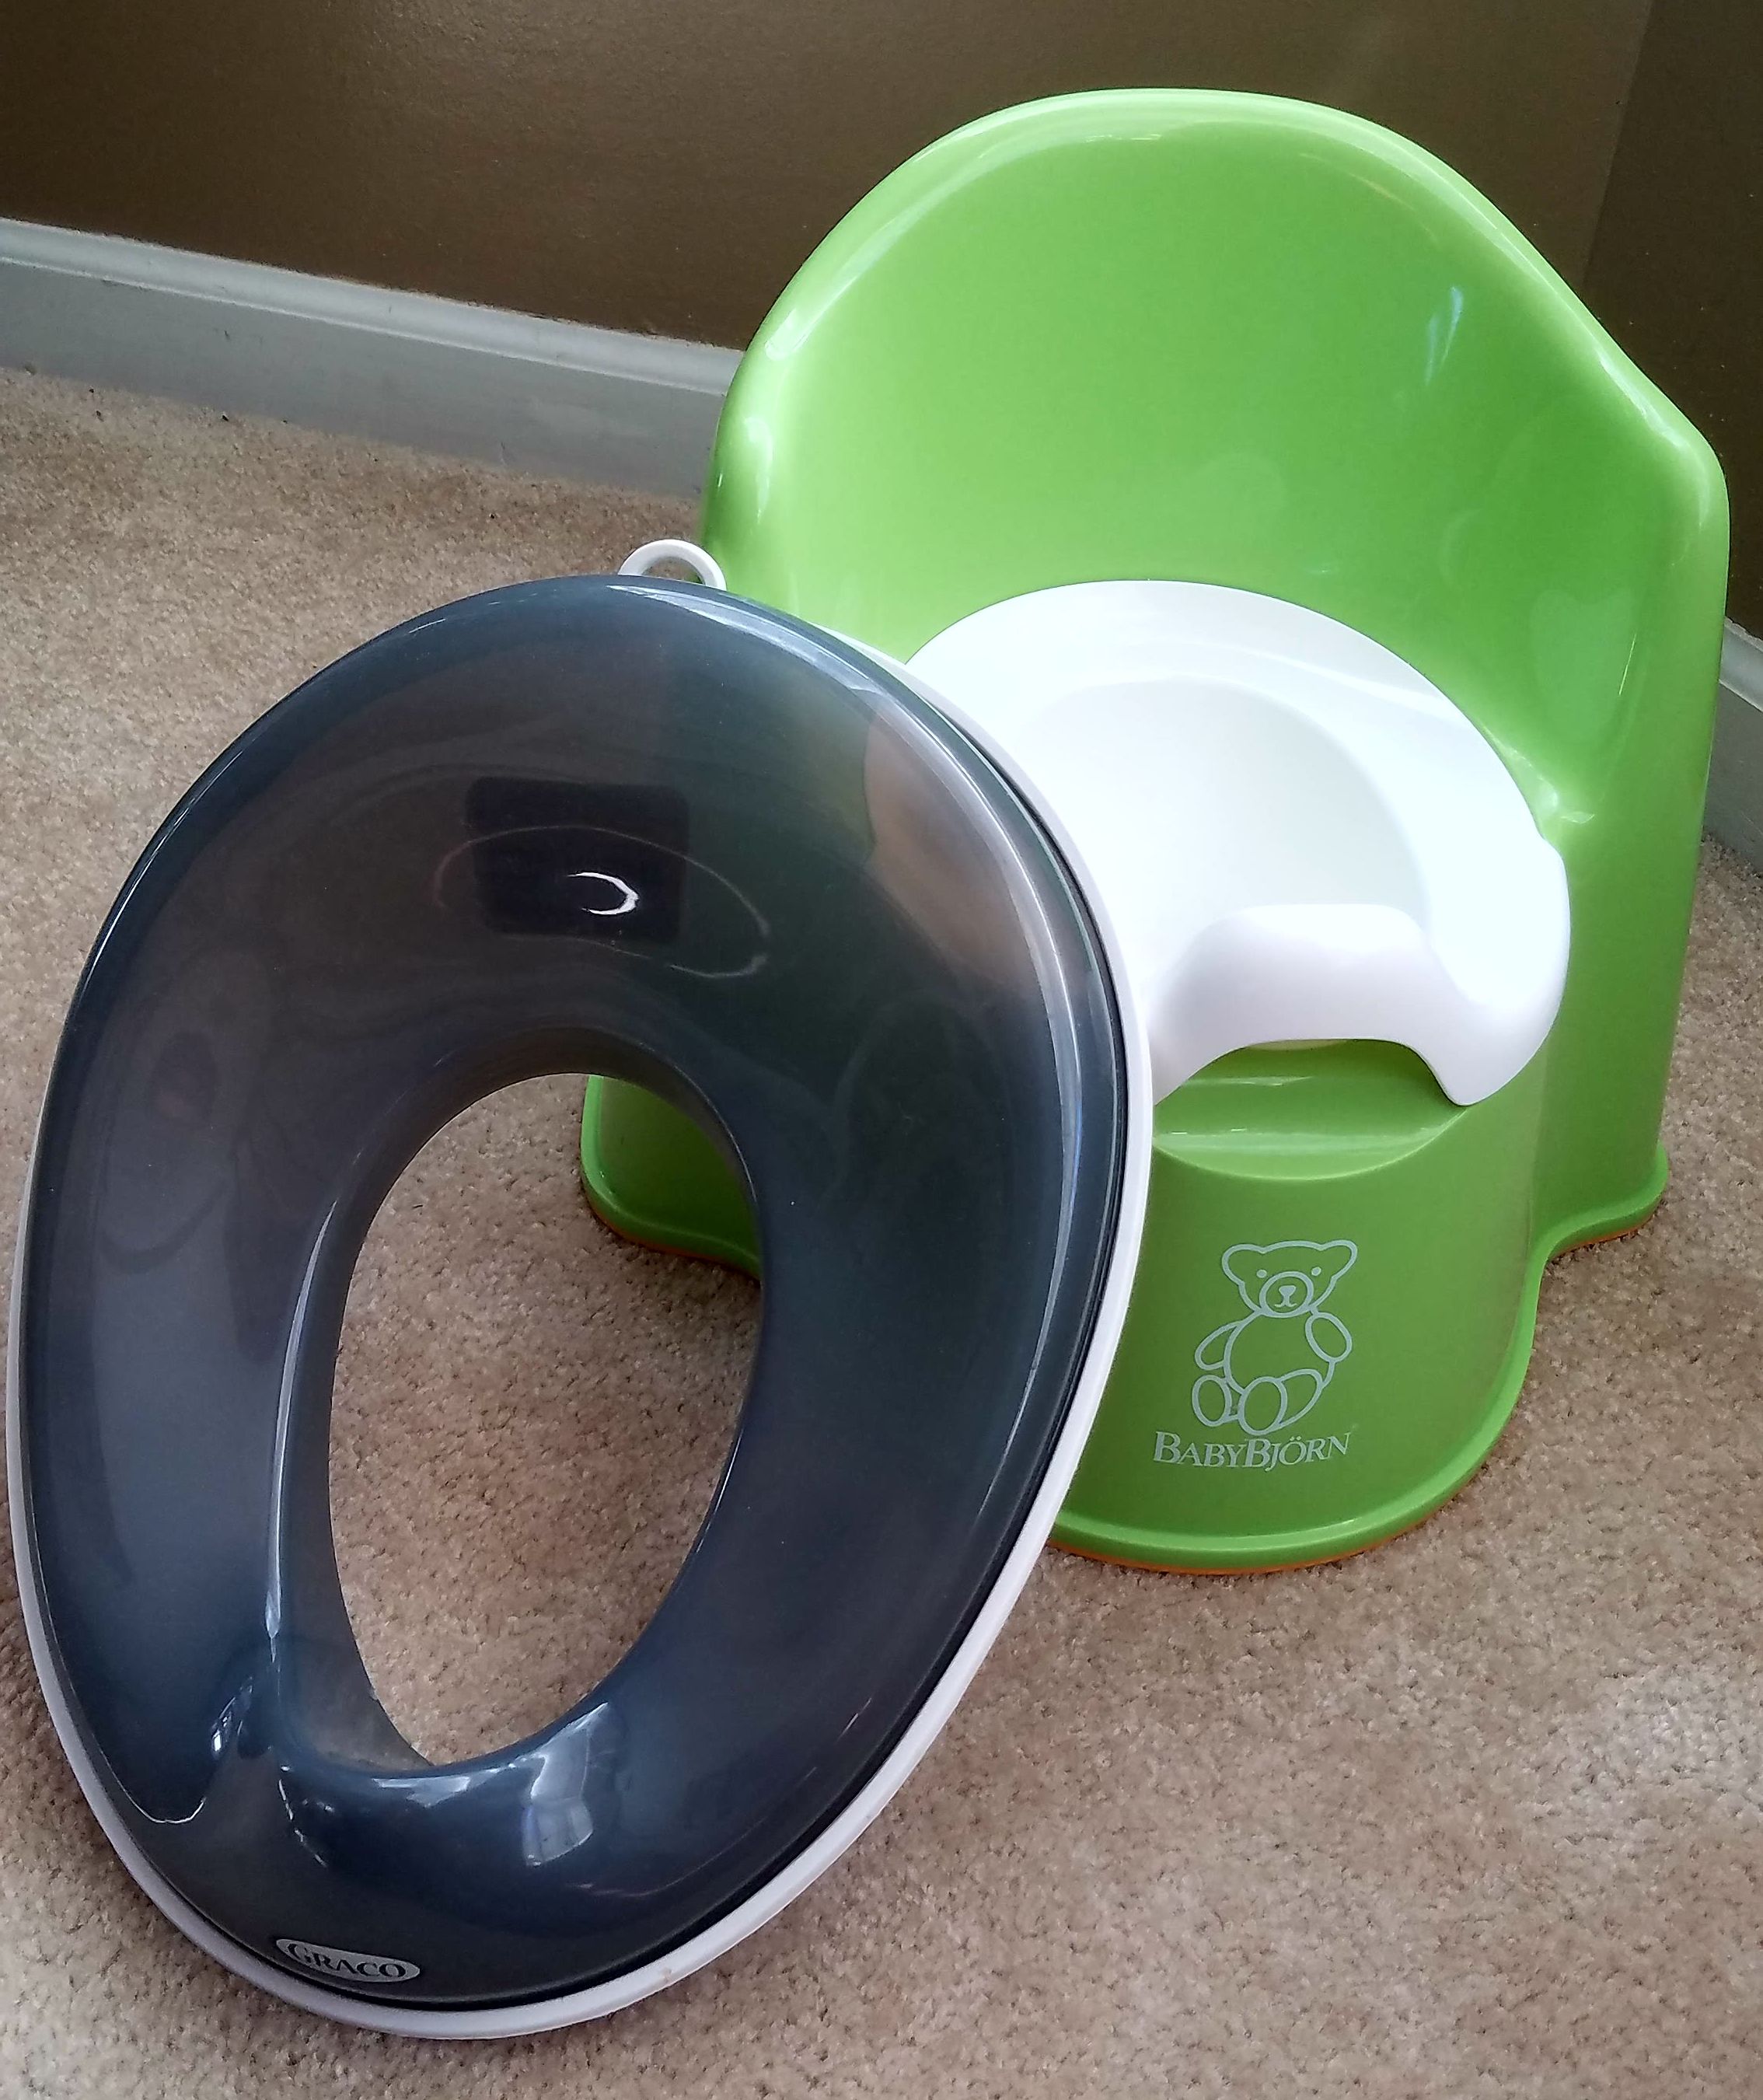 Vtech toy and training potty